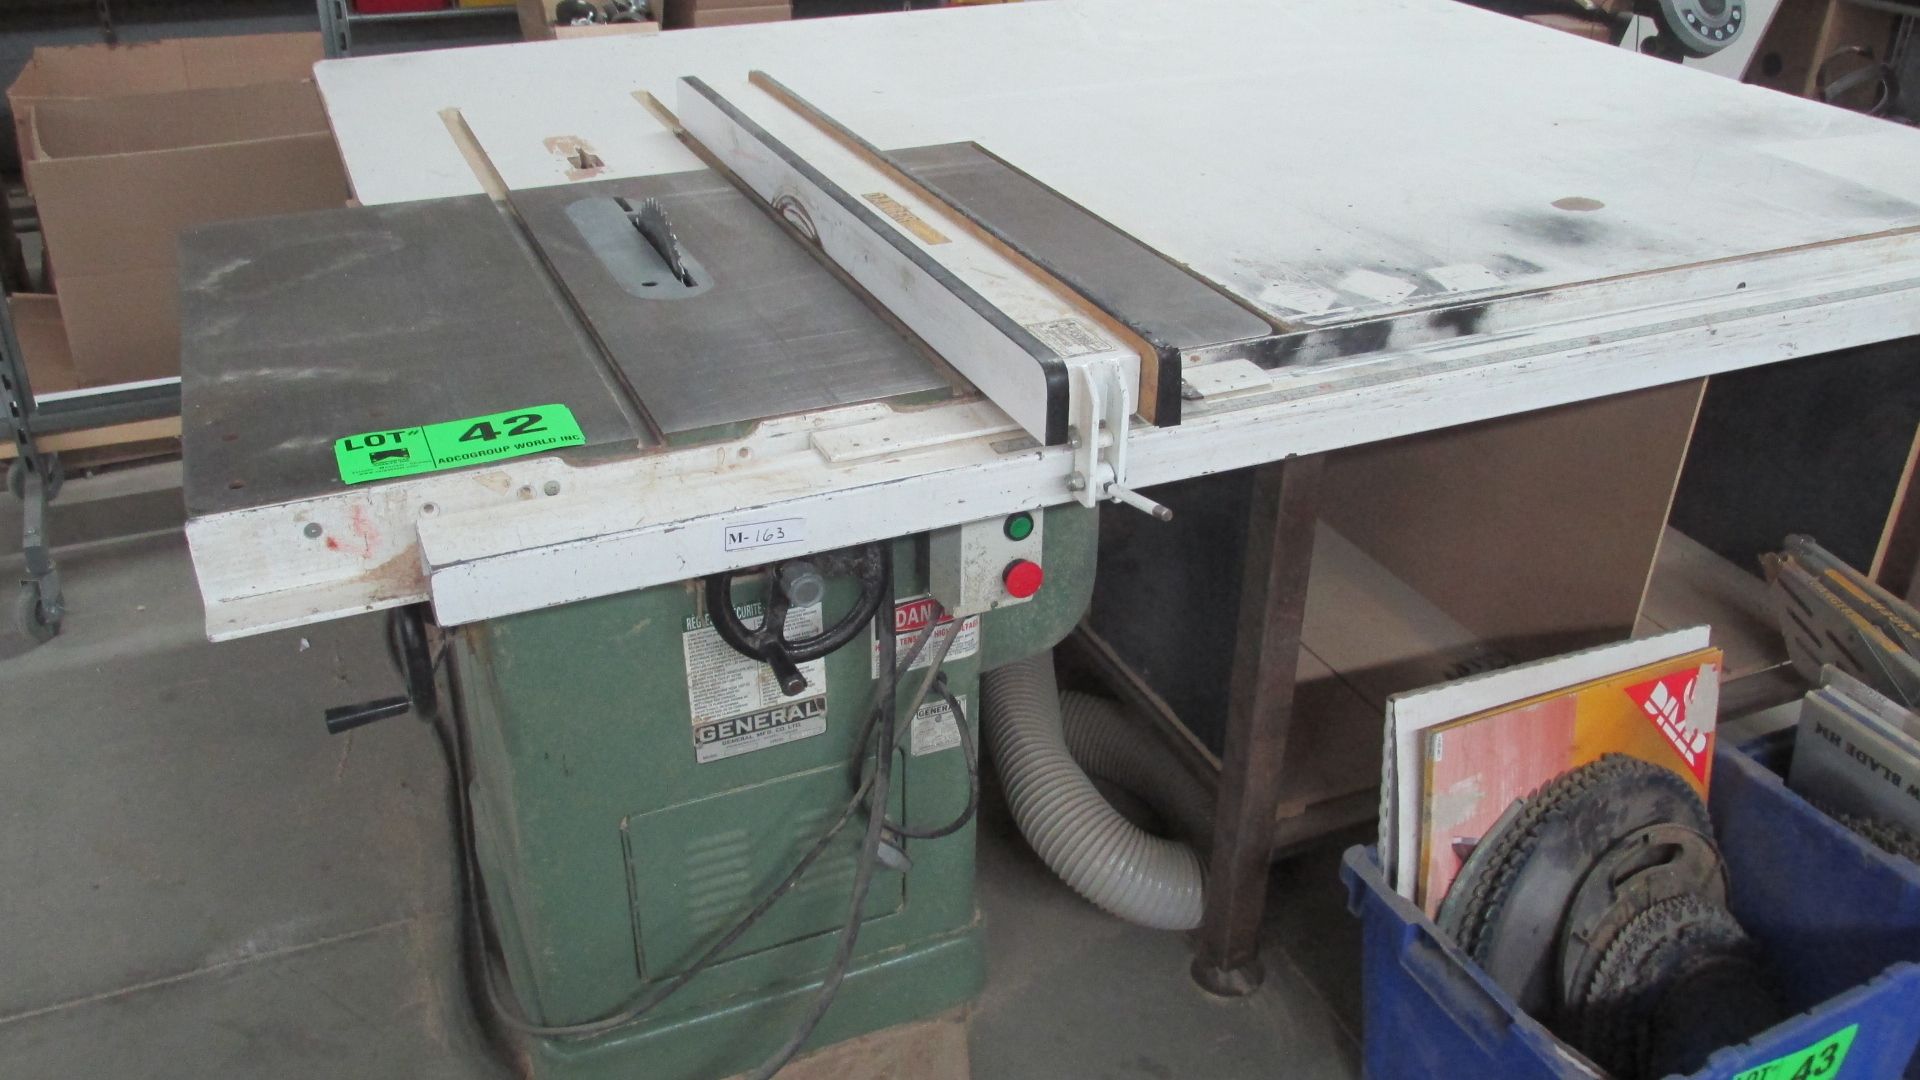 GENERAL 10" TABLE SAW S/N AD-2533 (CI)